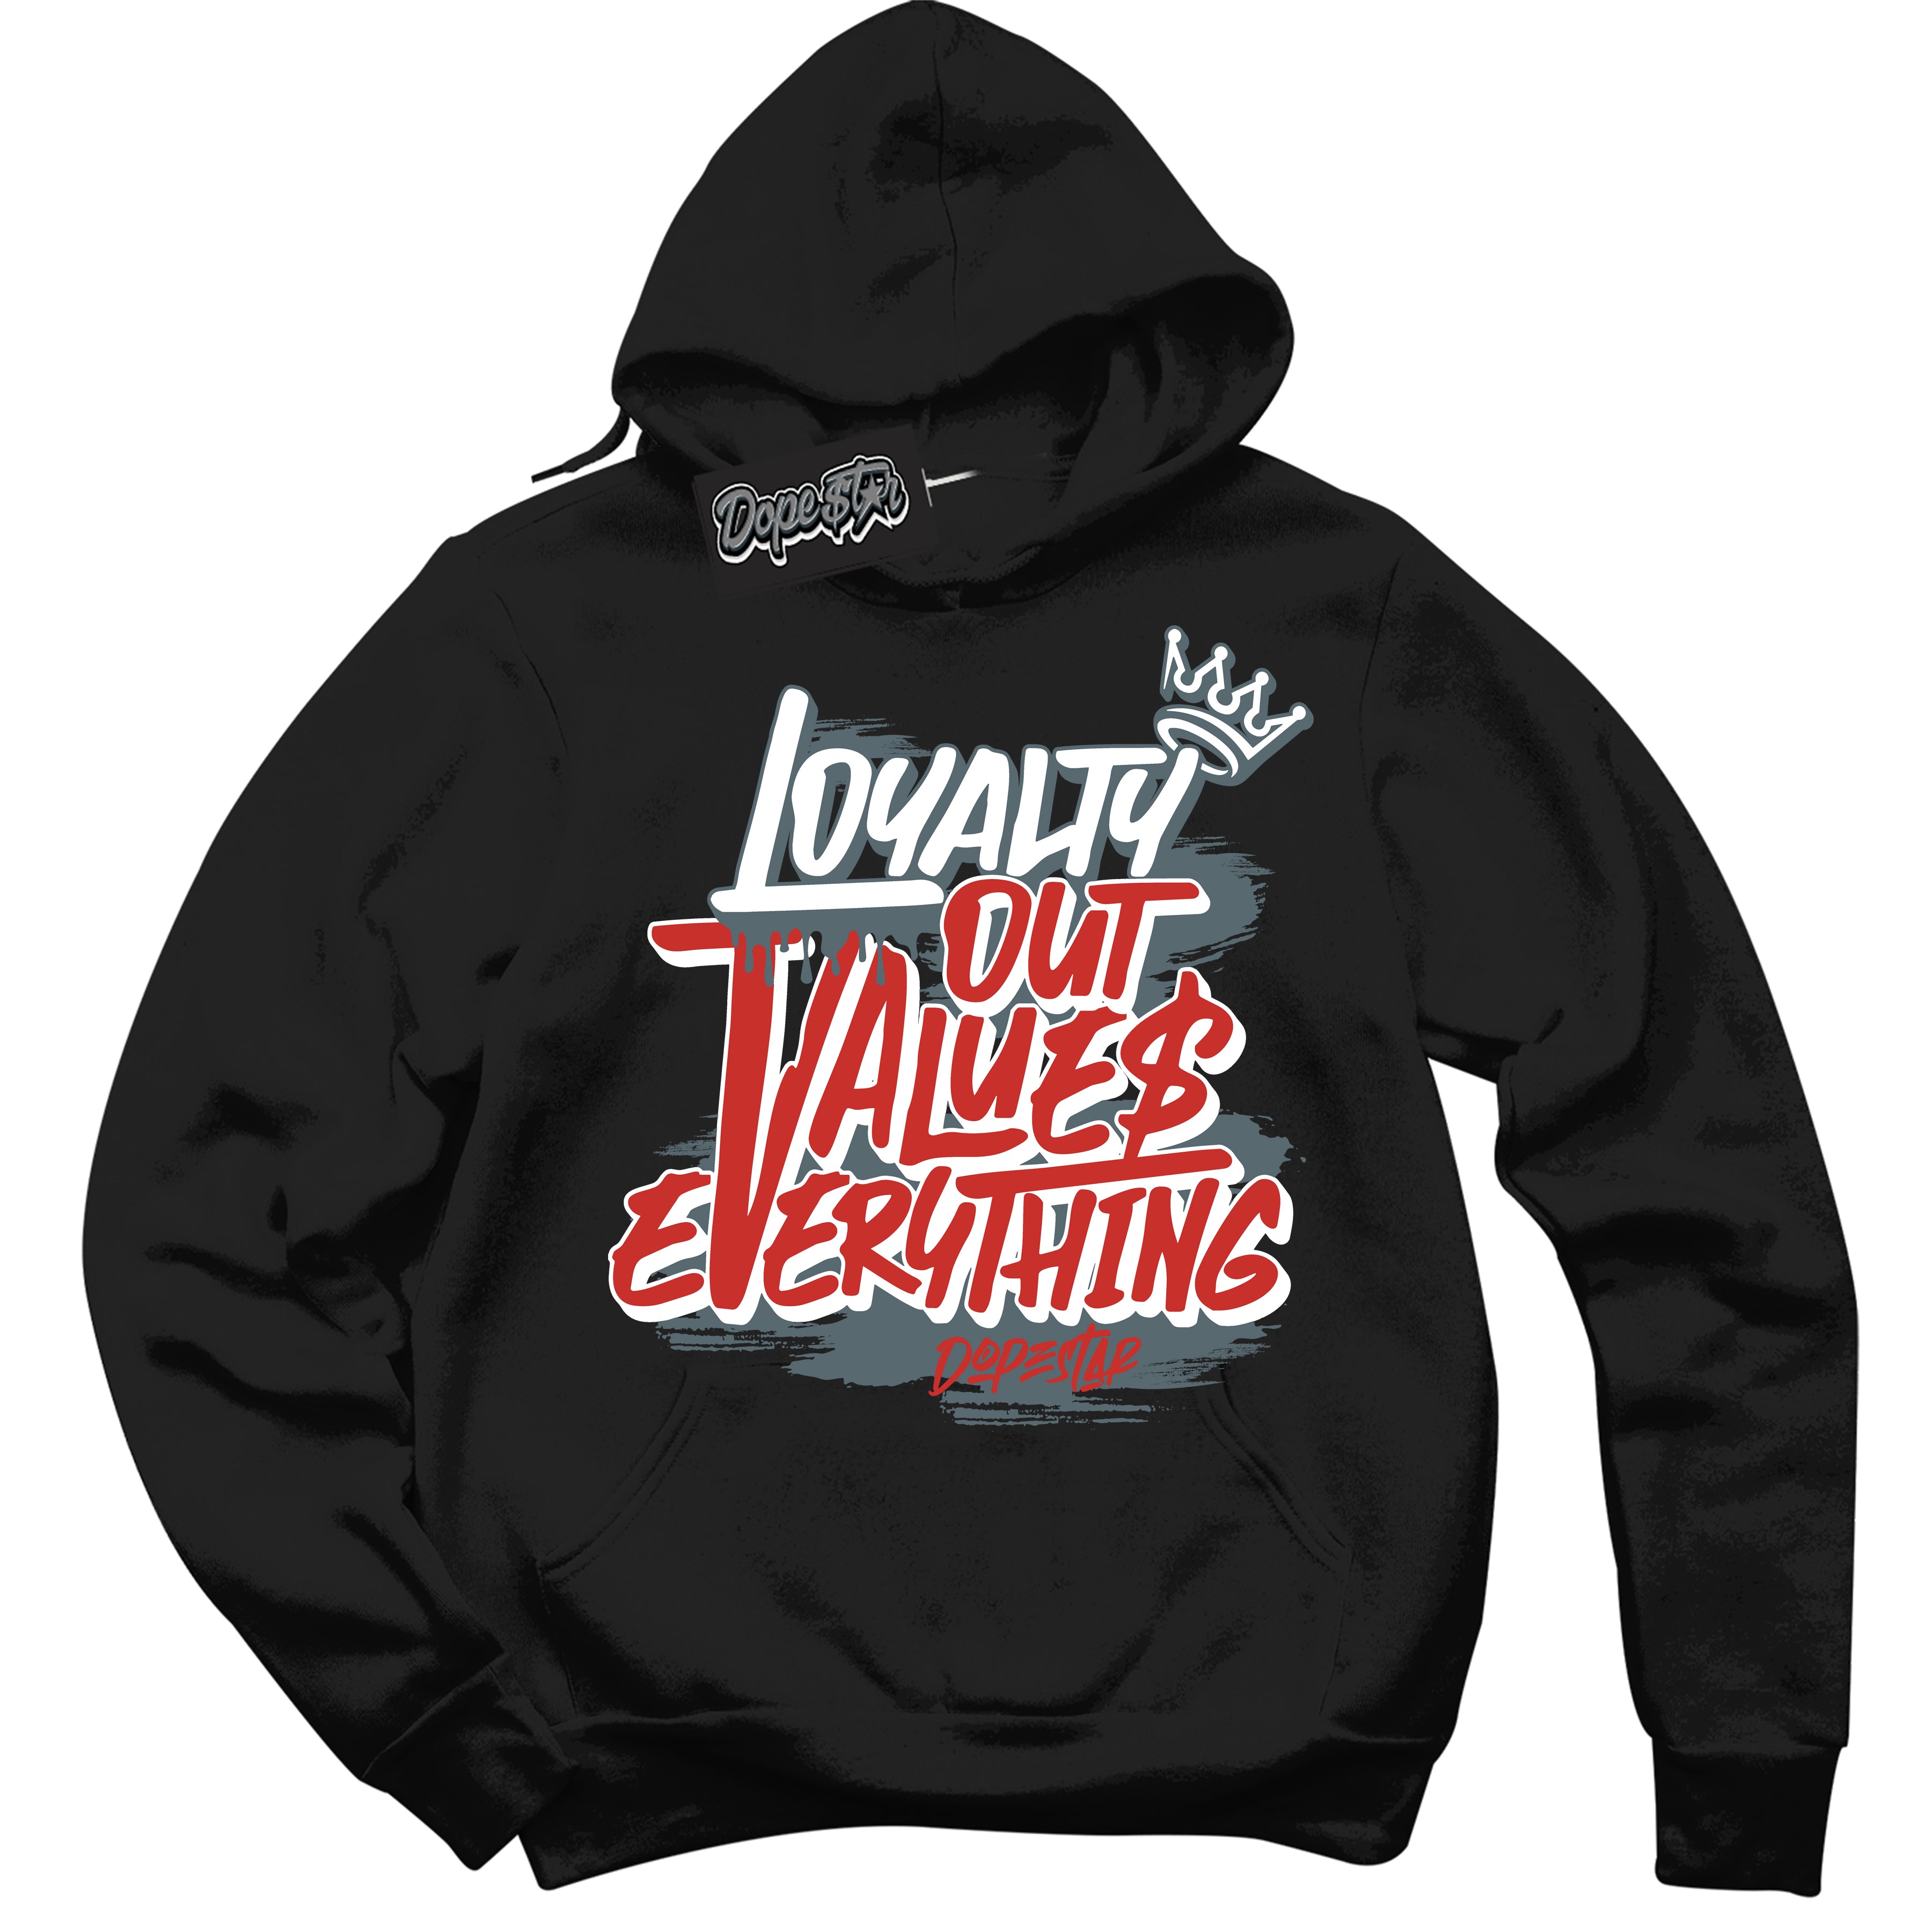 Cool Black Hoodie with “ Loyalty Out Values Everything ”  design that Perfectly Matches  Red Fire 9s Sneakers.